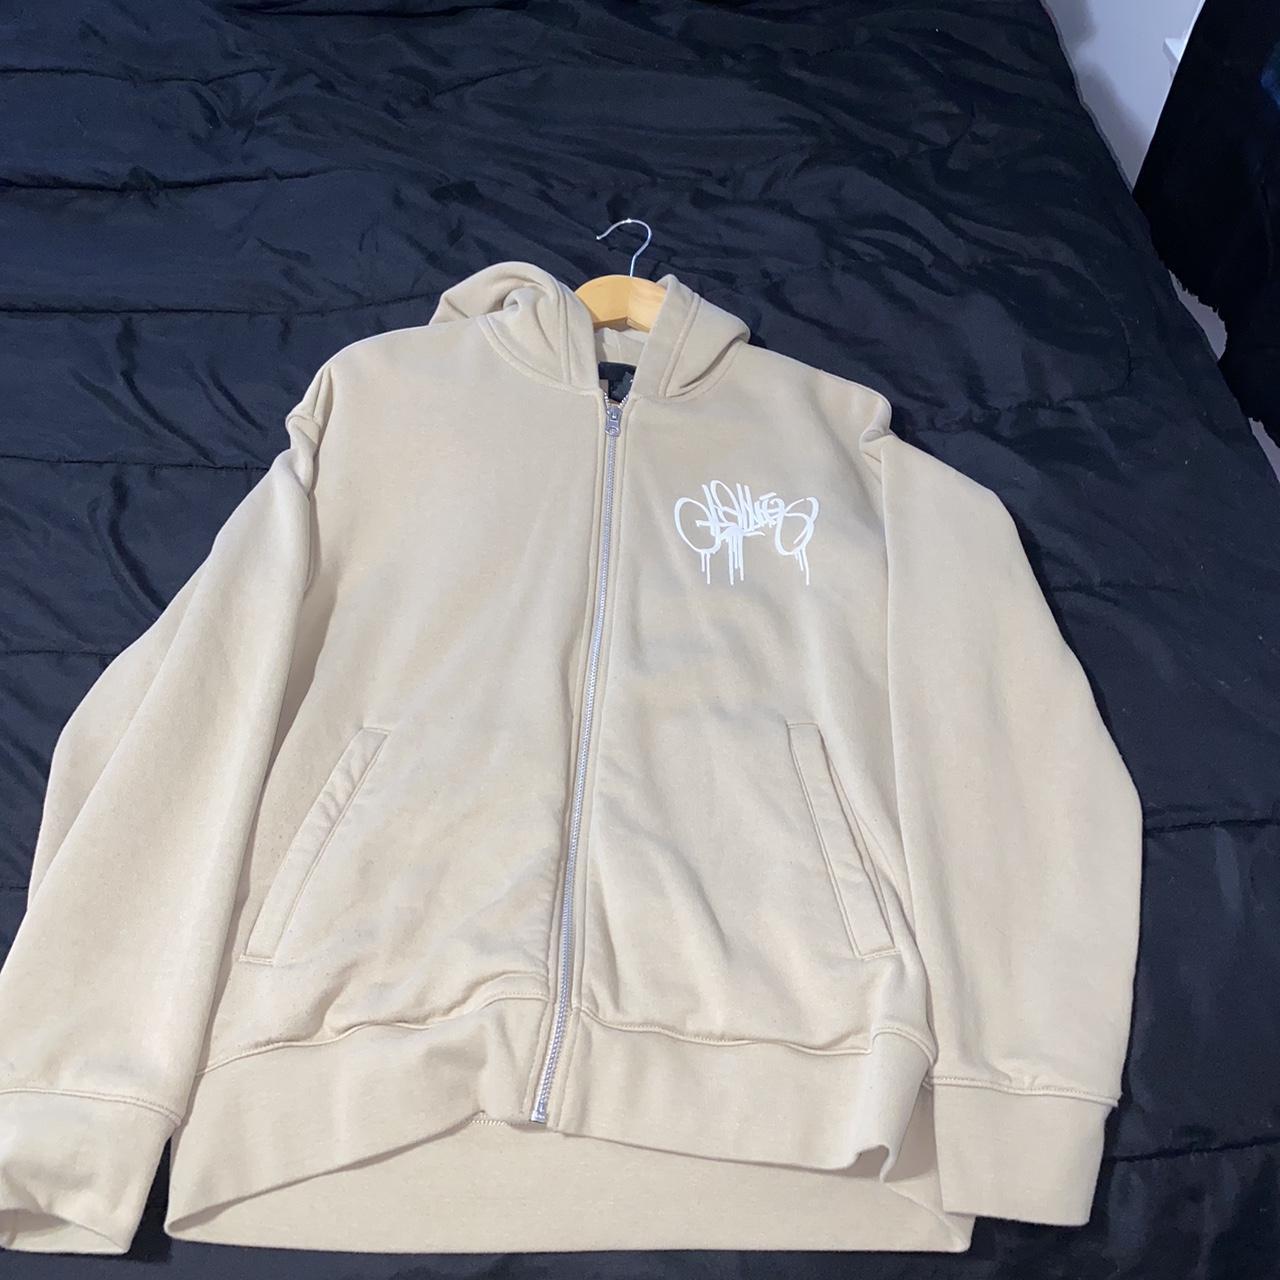 item listed by depoppwilliam